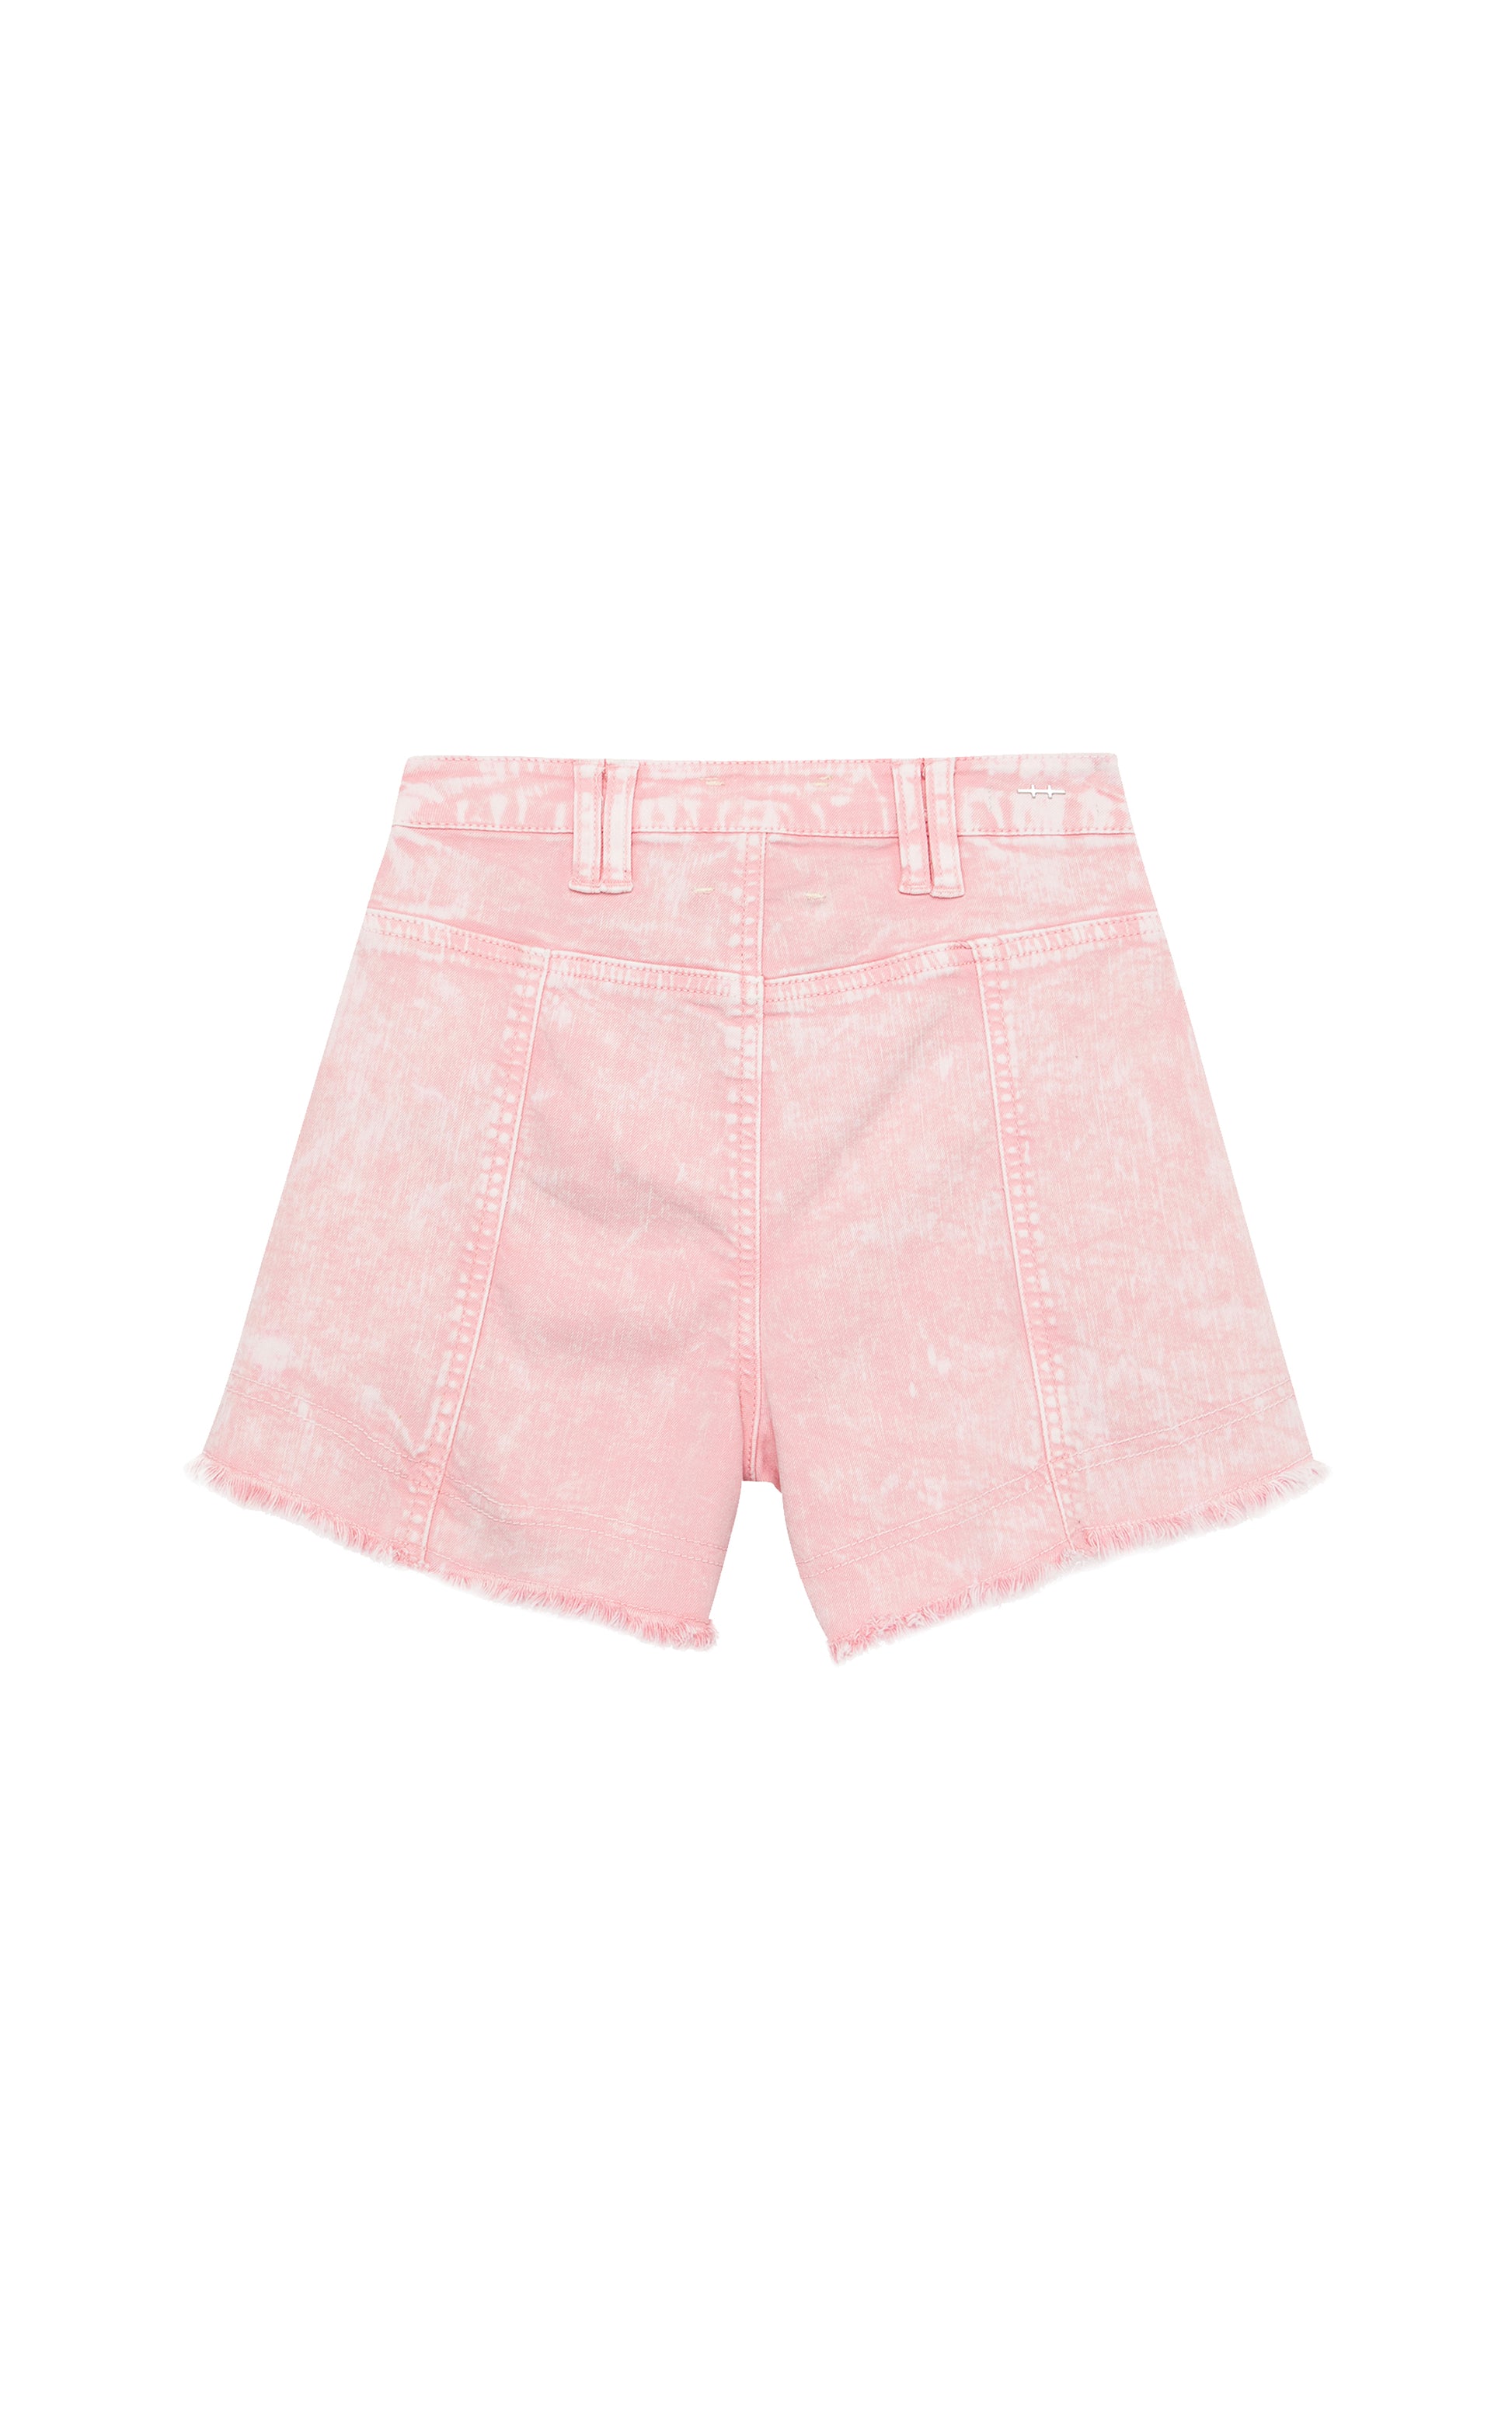 Back of pink denim lace front shorts